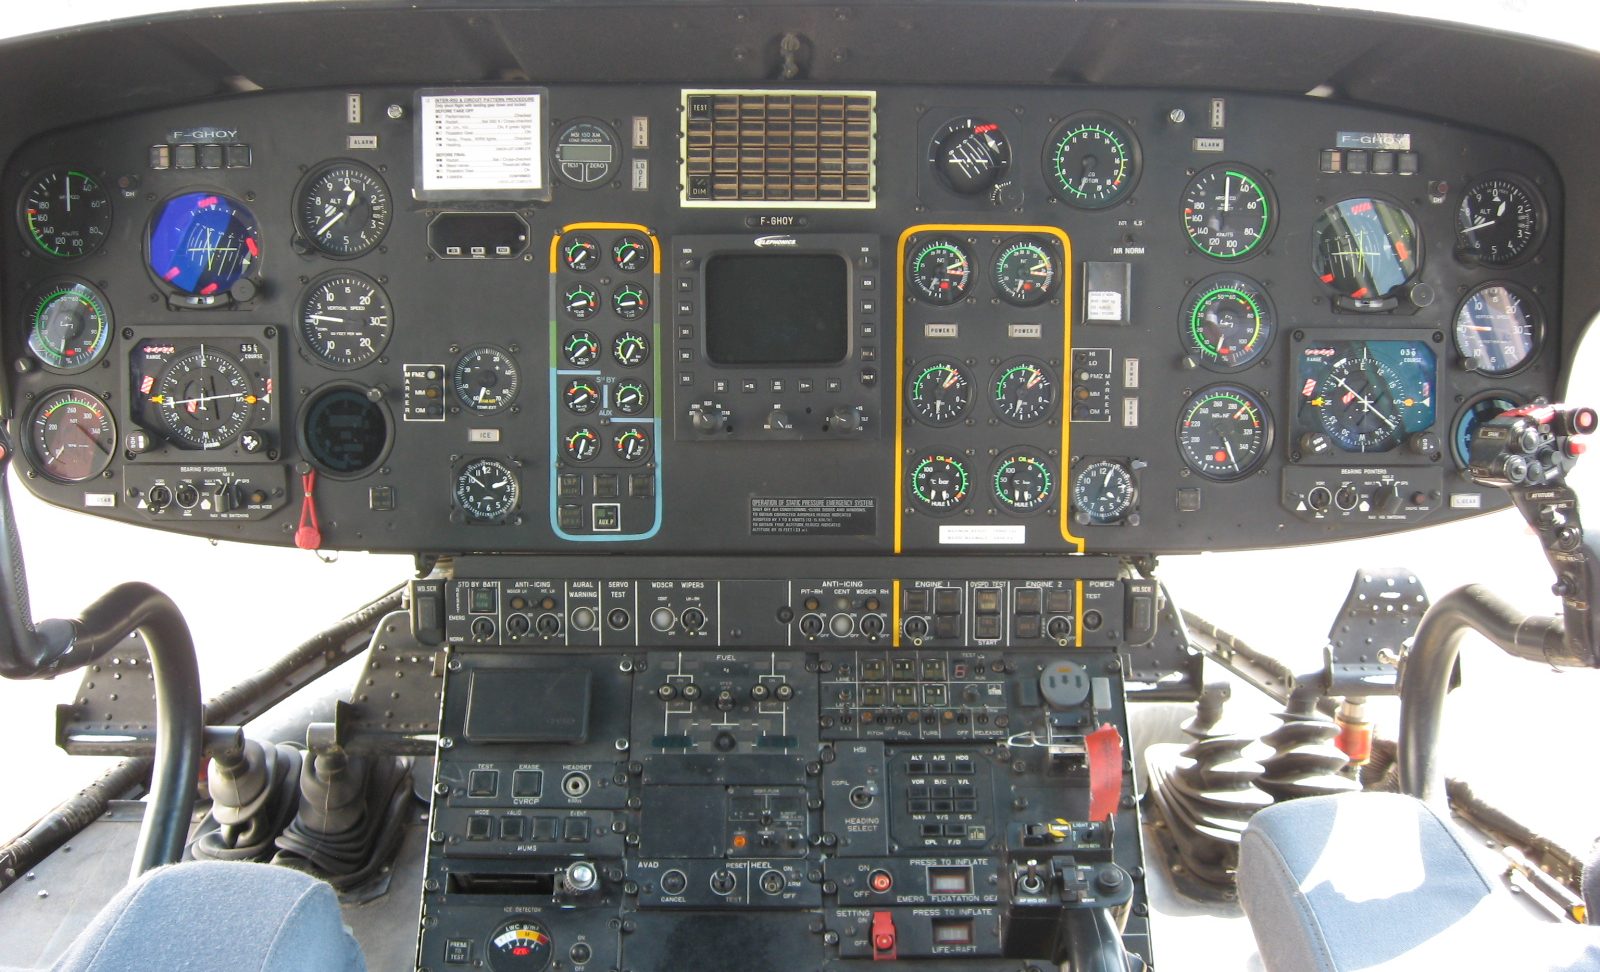 First EASA Certification of an LPV Capability for AS332L1 With Digital and Analogic Systems